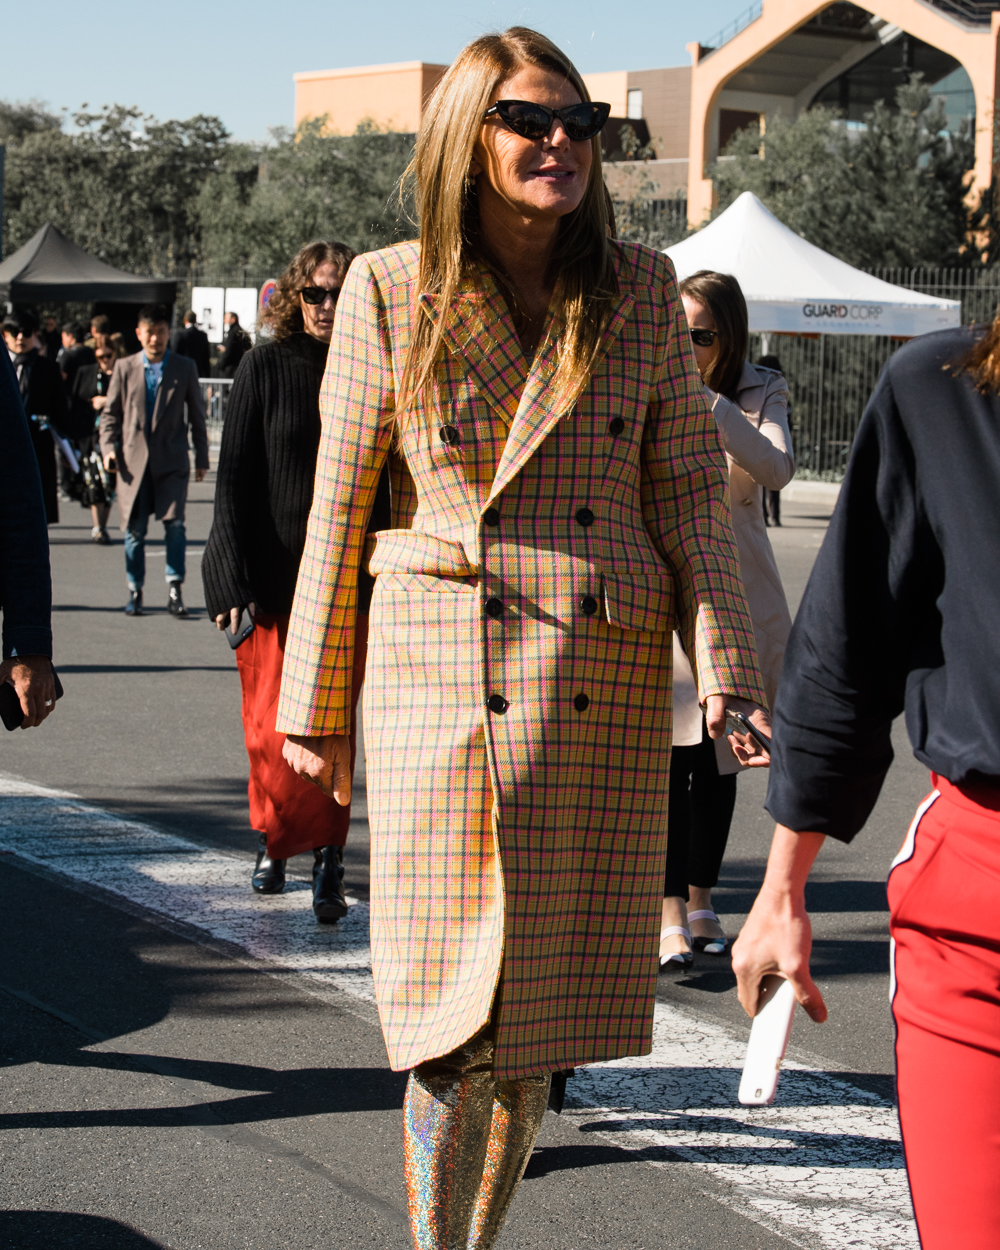 Trenches, box bags and lace socks: the best street style this PFW